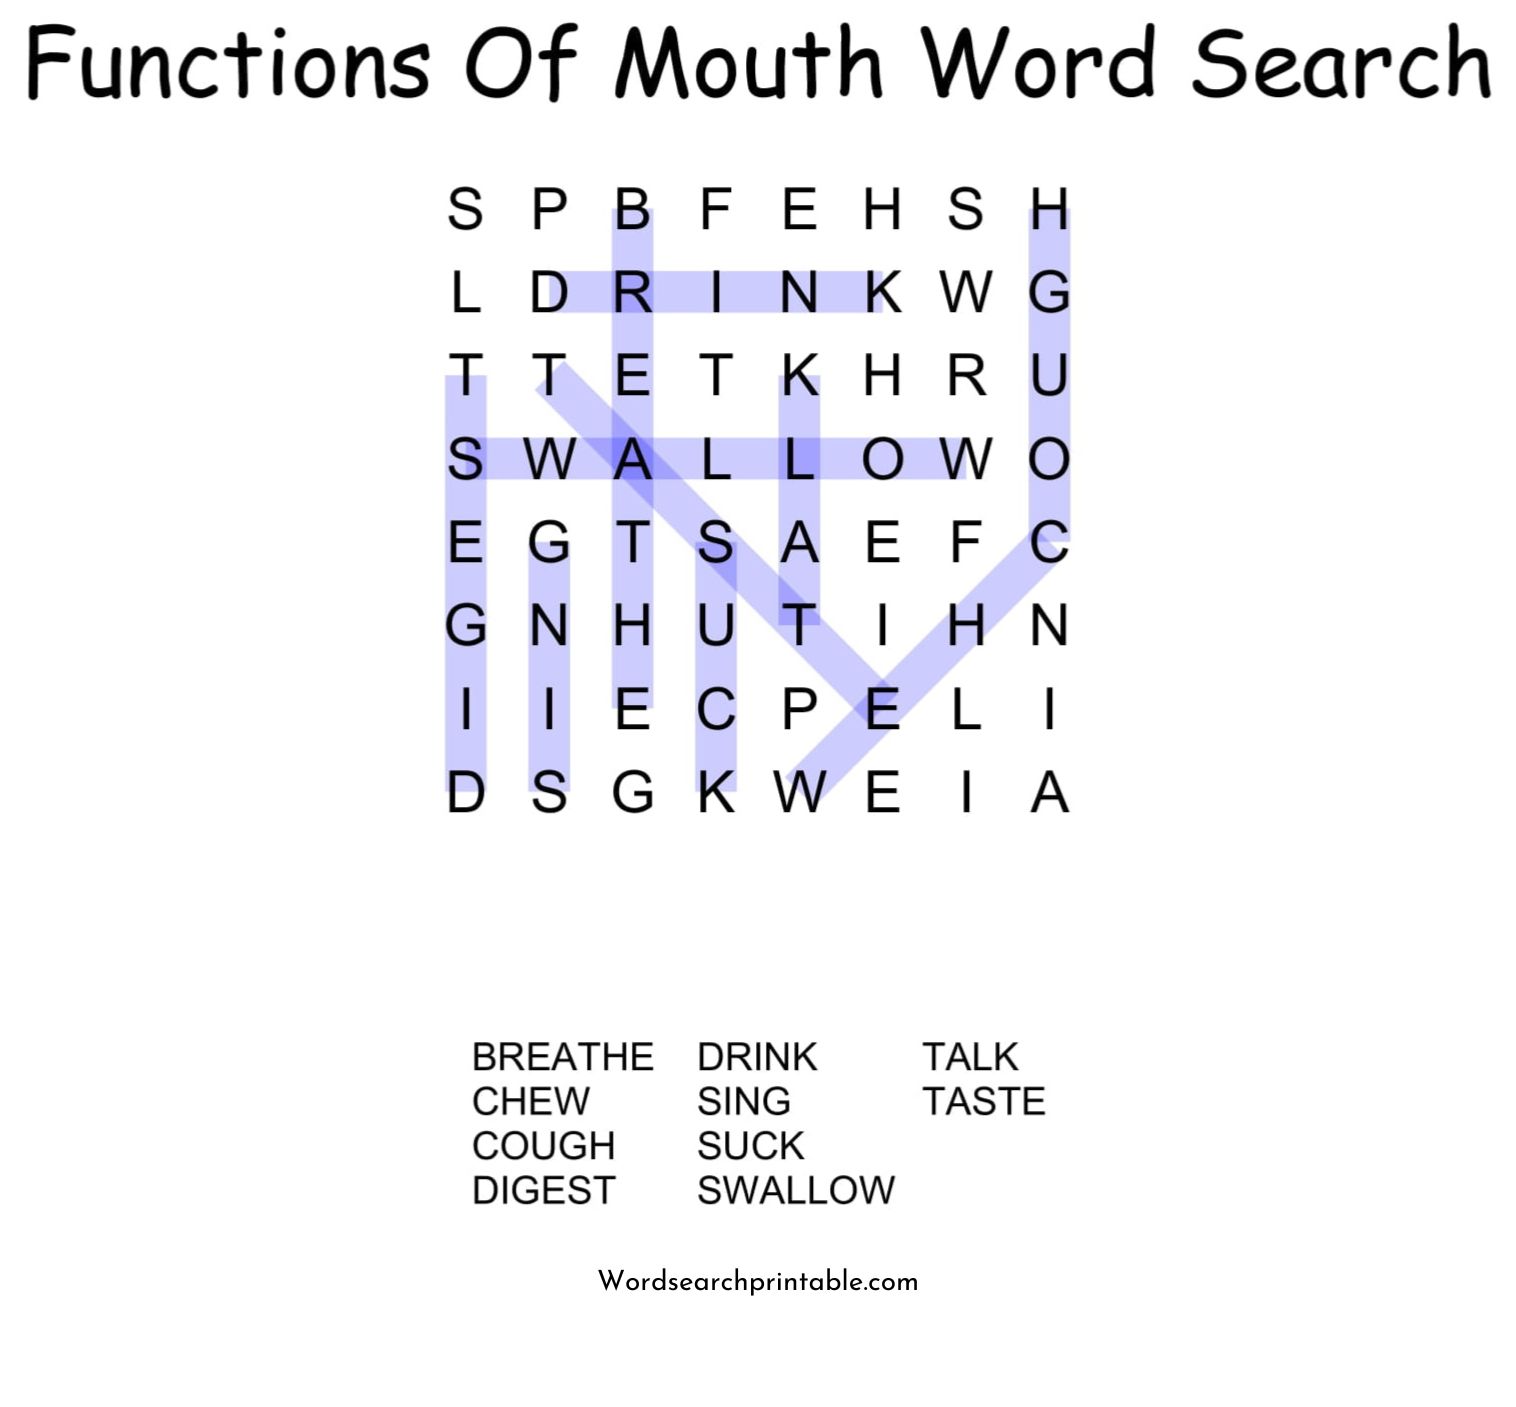 functions of mouth word search puzzle solution